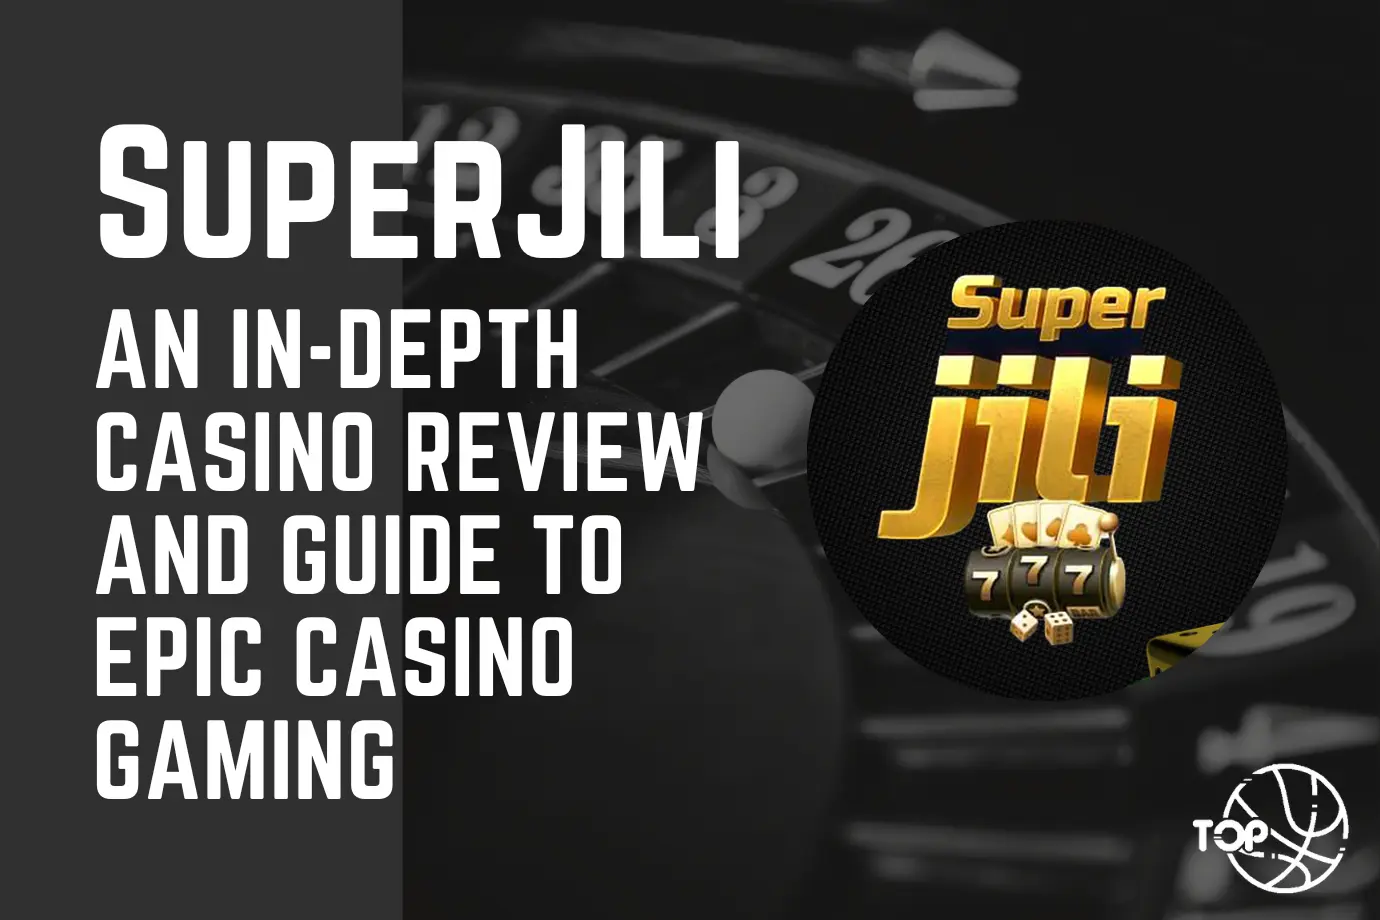 SuperJili: An In-Depth Casino Review and Guide to Epic Casino Gaming